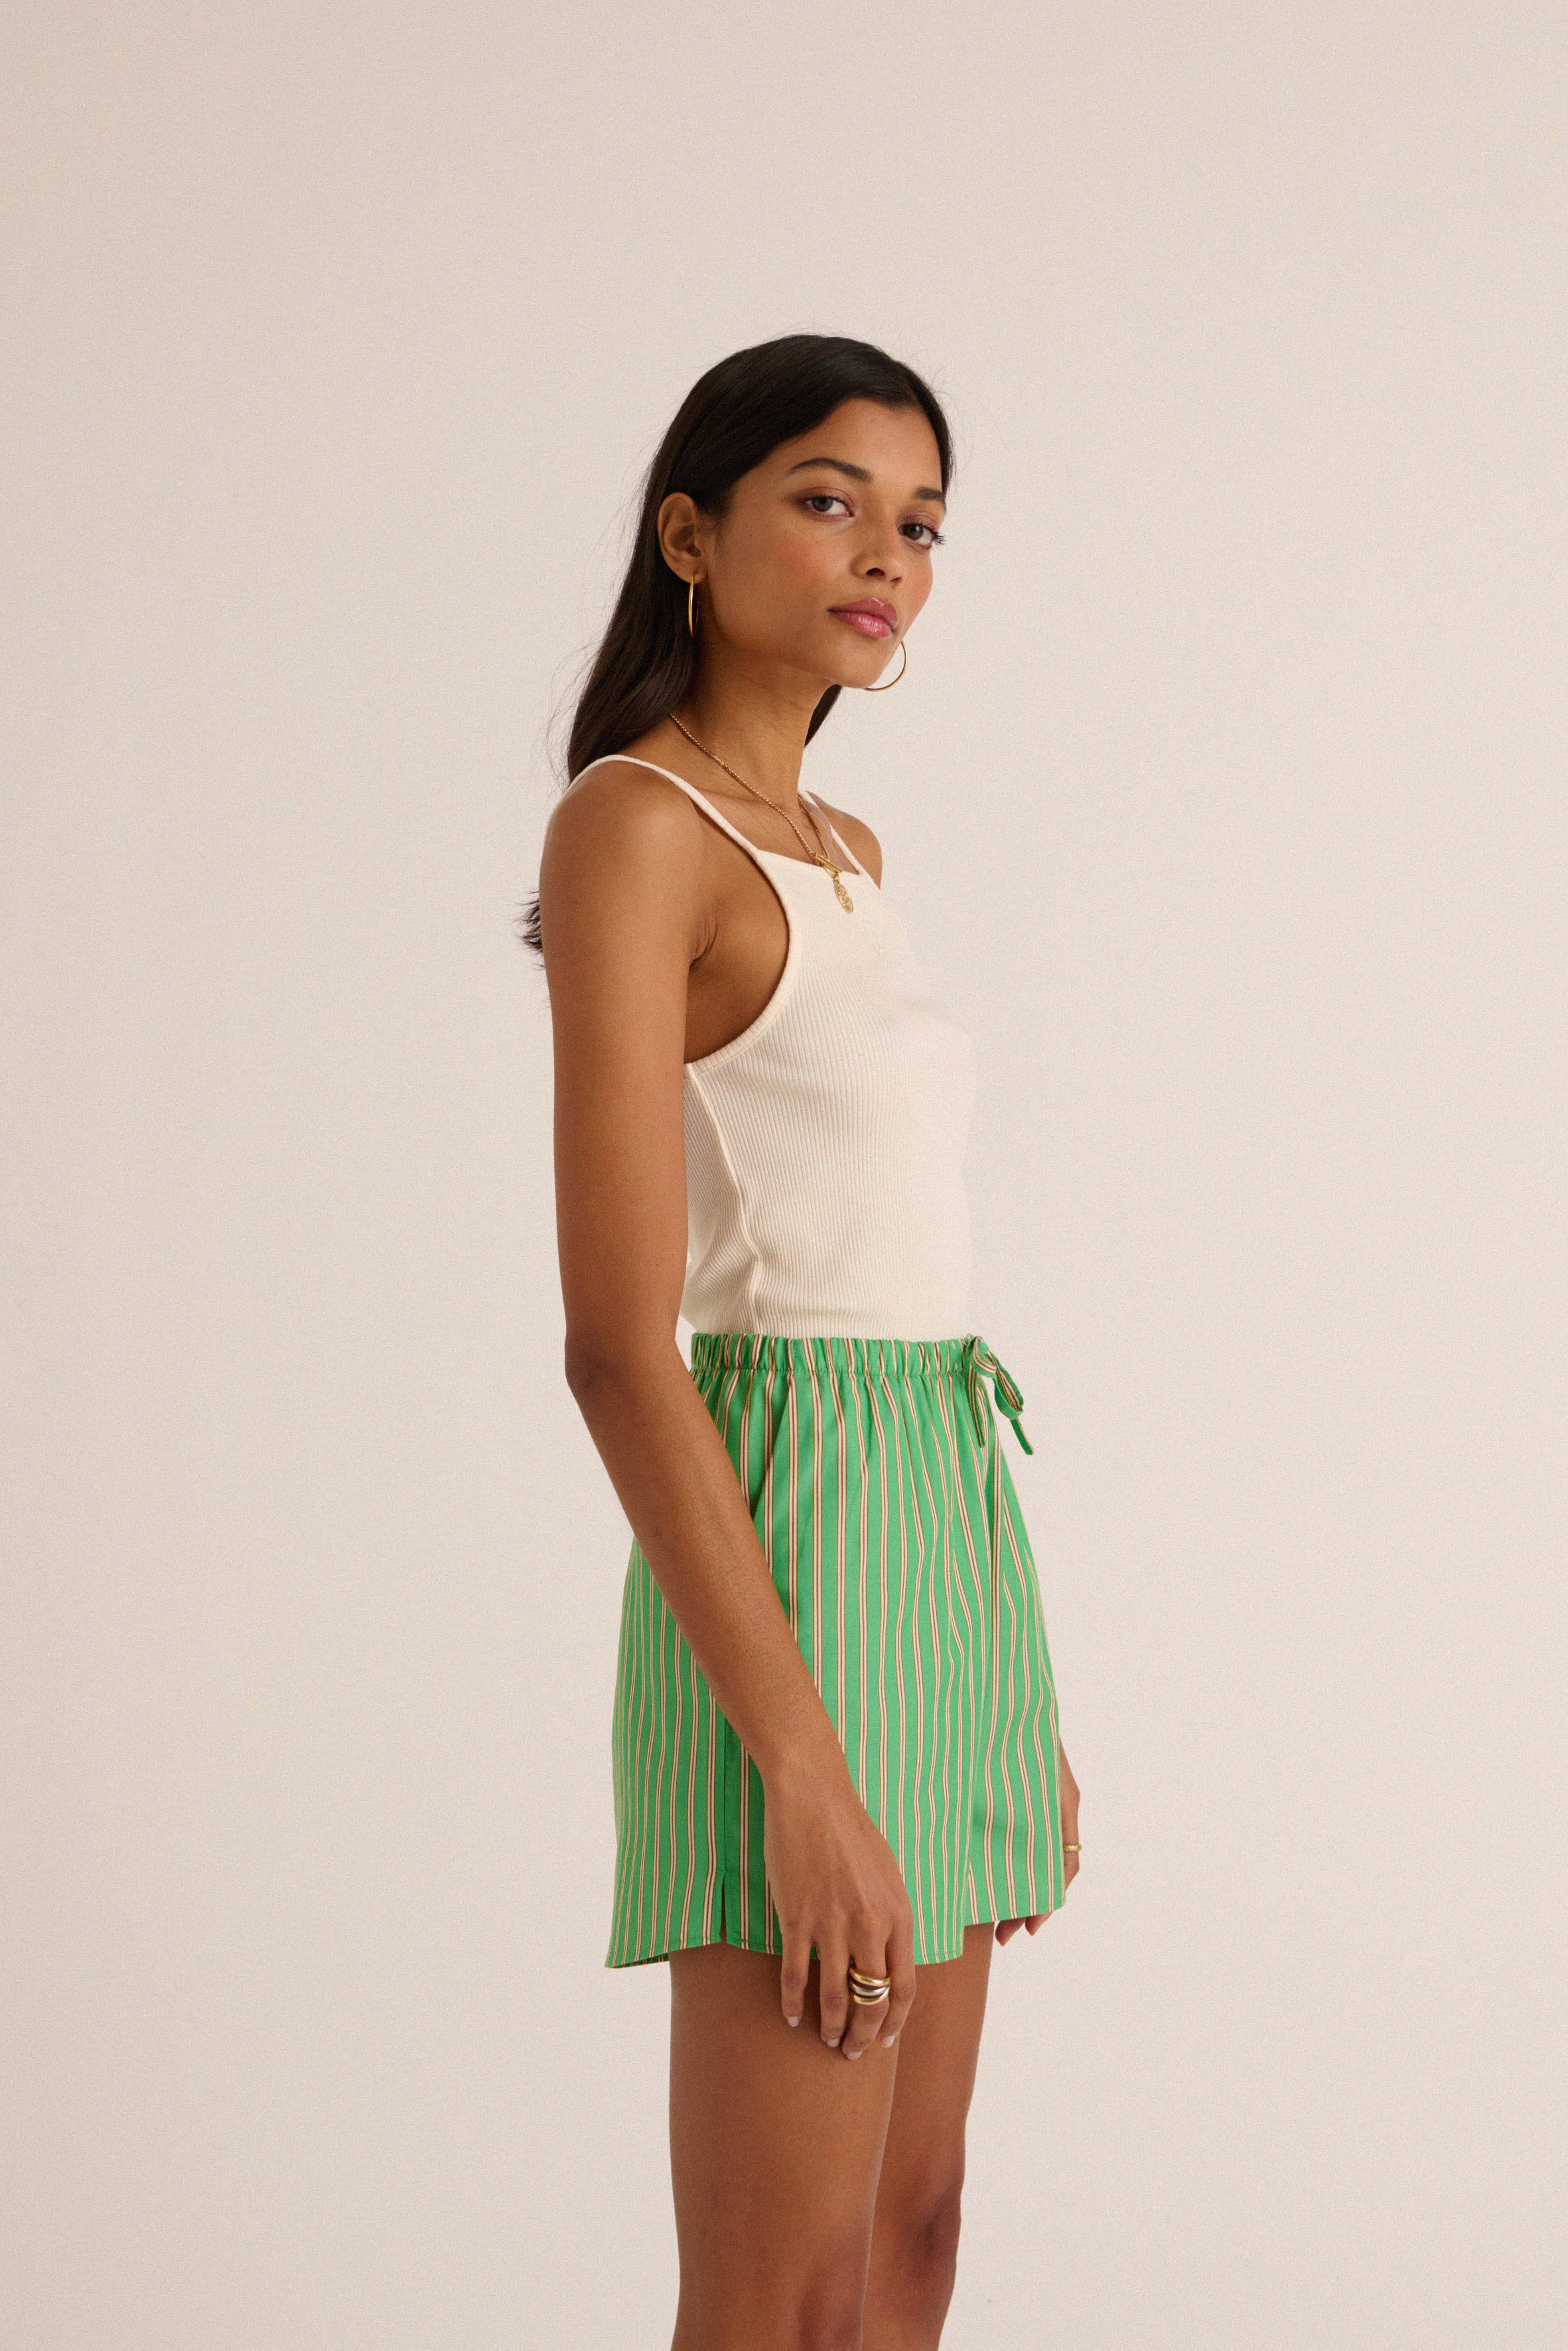 Green and yellow striped Lino shorts